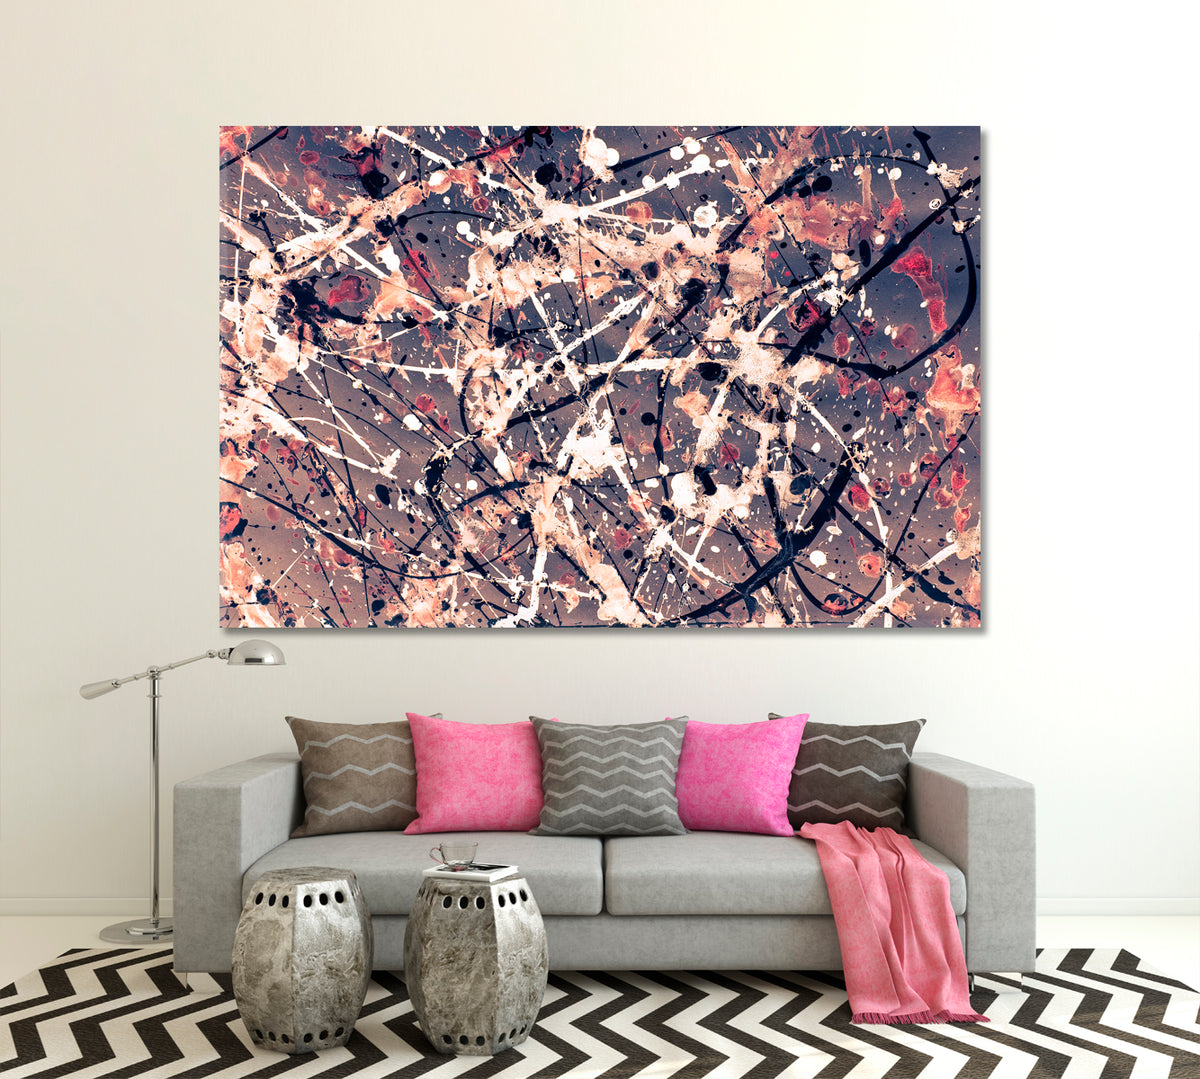 Style of Jackson Pollock Drip Art Abstract Expressionism Pattern Abstract Art Print Artesty 1 panel 24" x 16" 